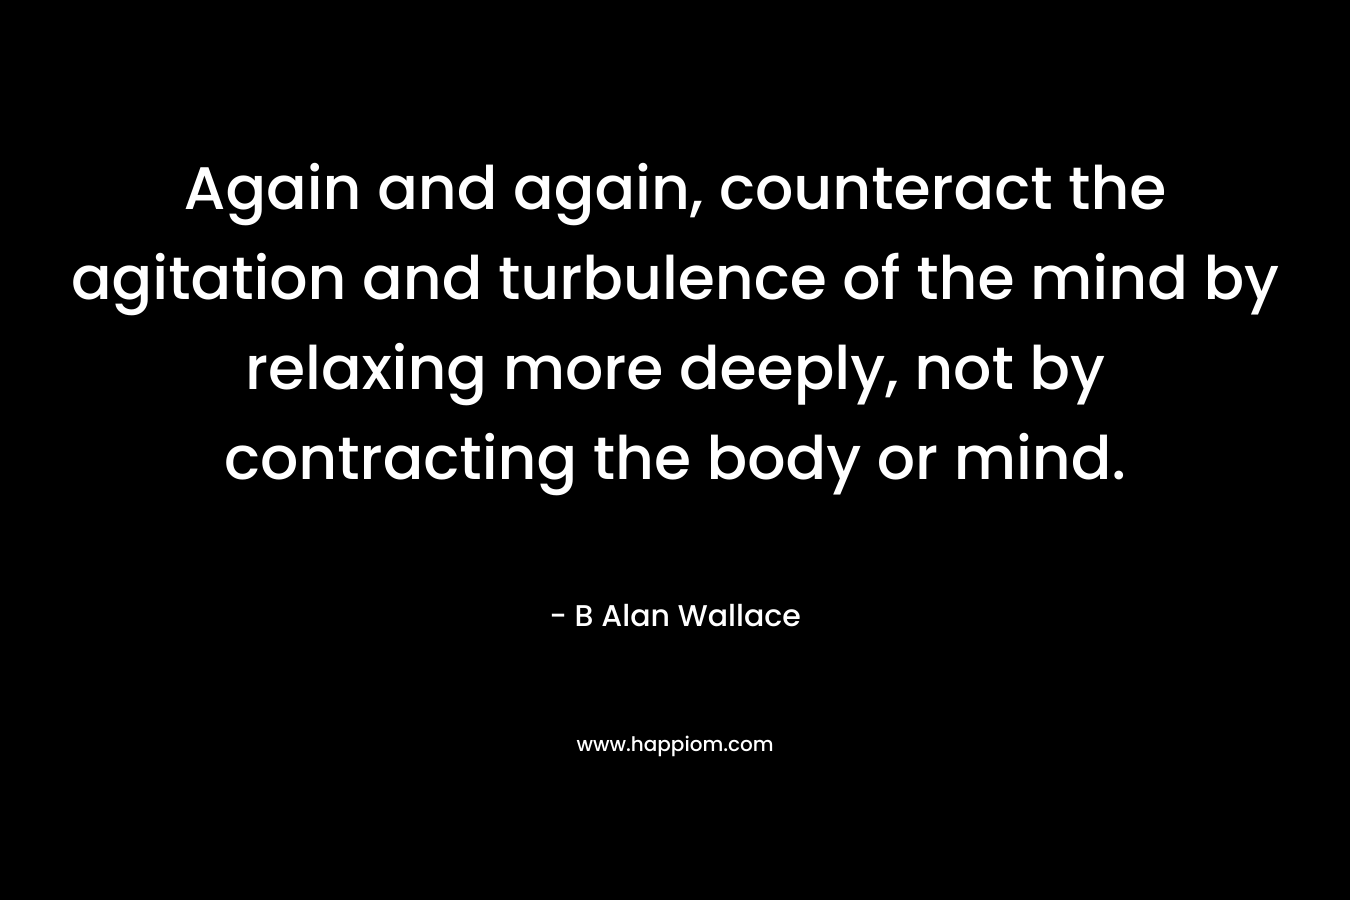 Again and again, counteract the agitation and turbulence of the mind by relaxing more deeply, not by contracting the body or mind.